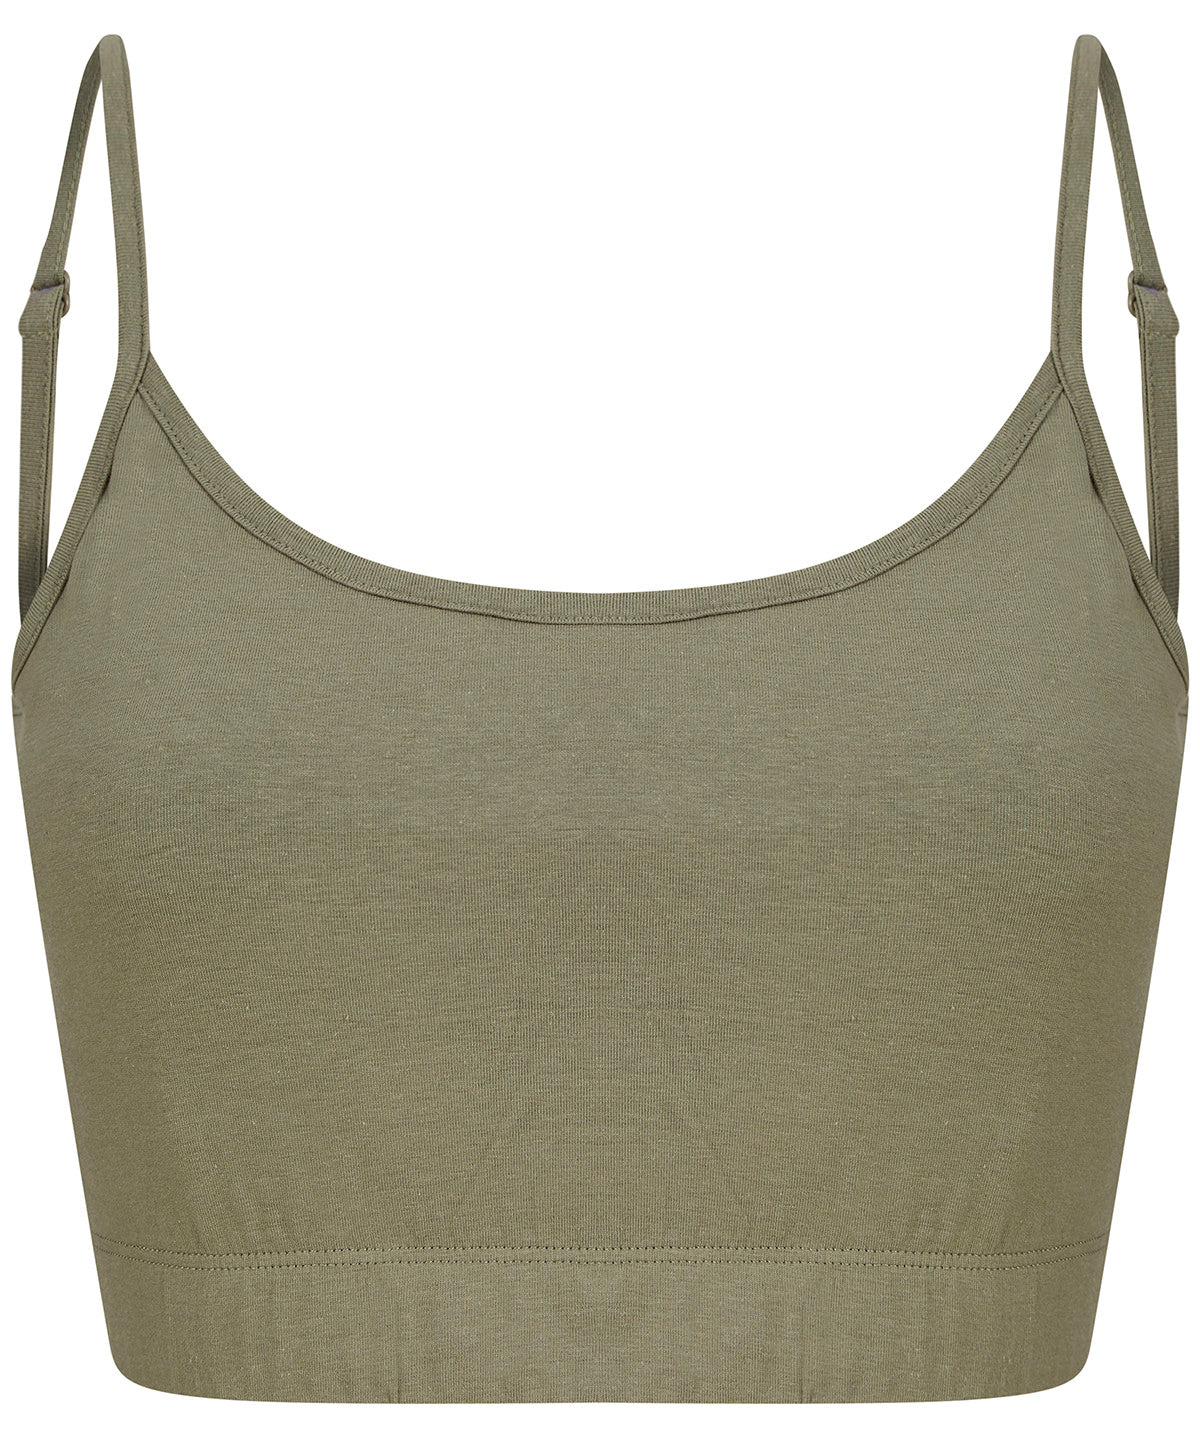 Stuttermabolir - Women's Sustainable Fashion Cropped Cami Top With Adjustable Straps